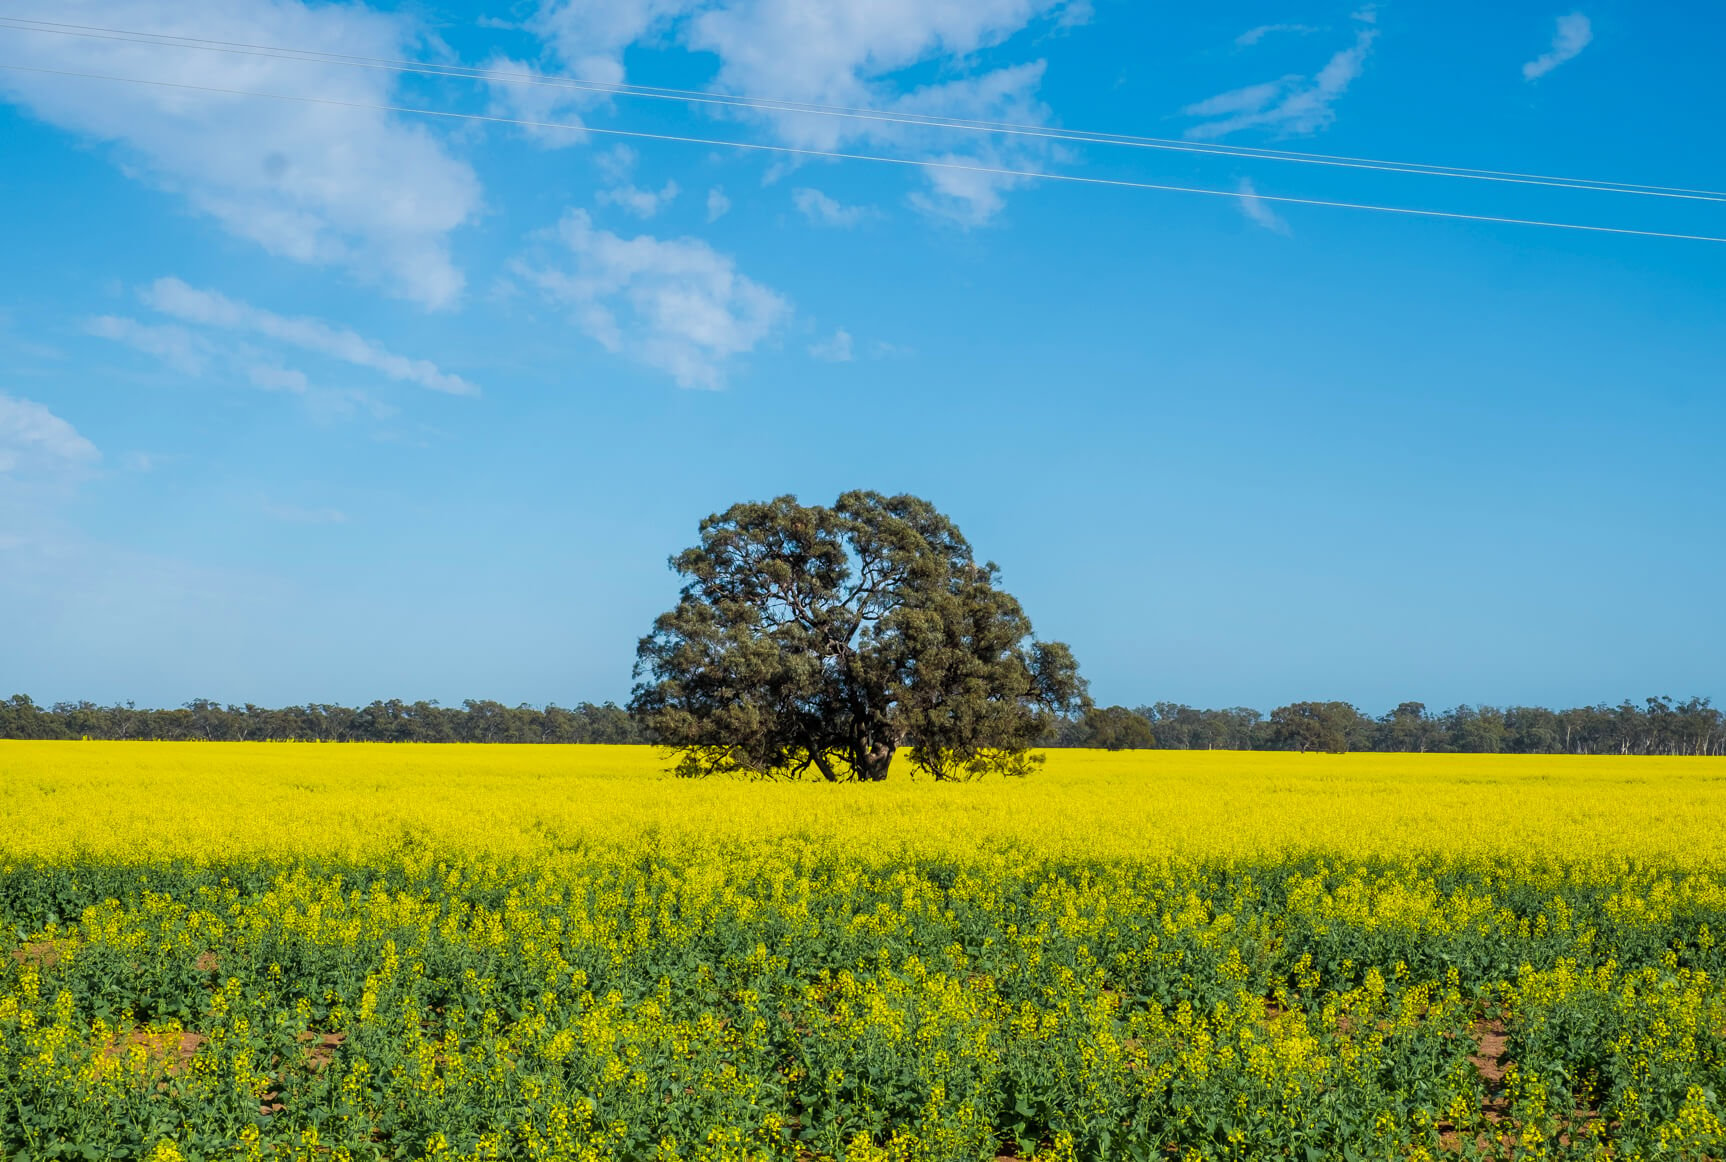 A canola field in bloom seen while road tripping through New South Wales, Australia.